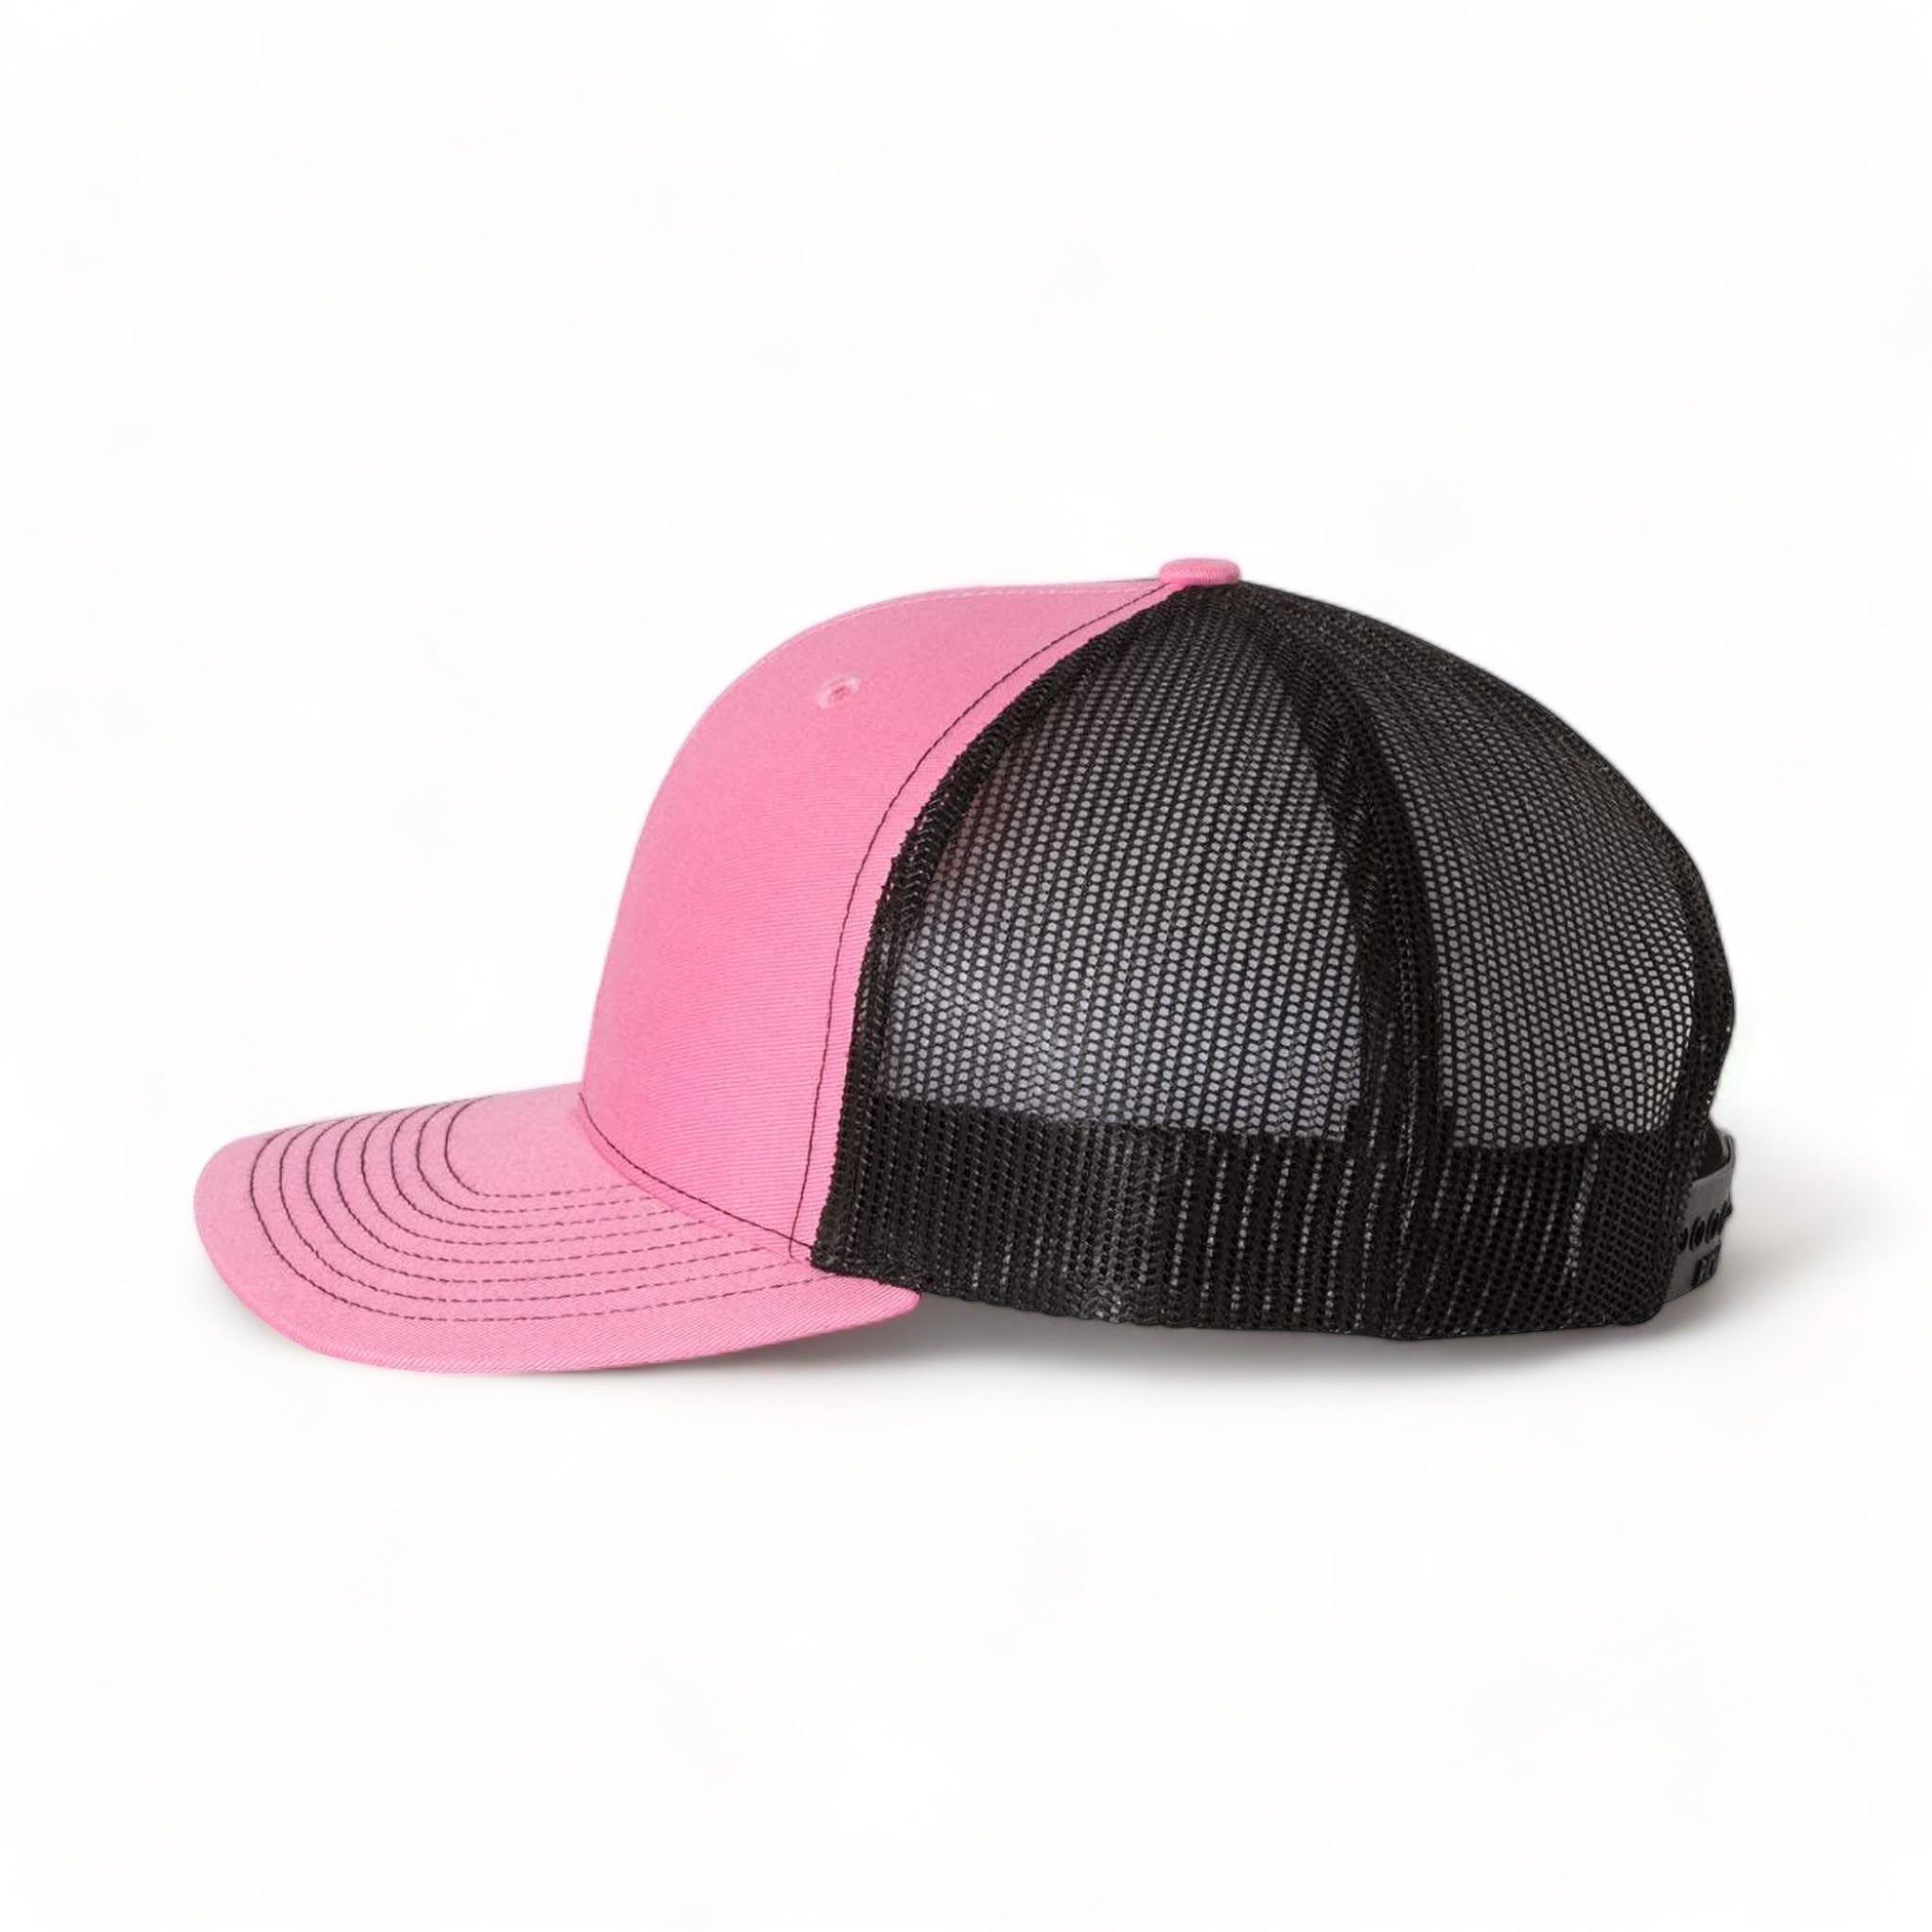 Side view of Richardson 112 custom hat in hot pink and black